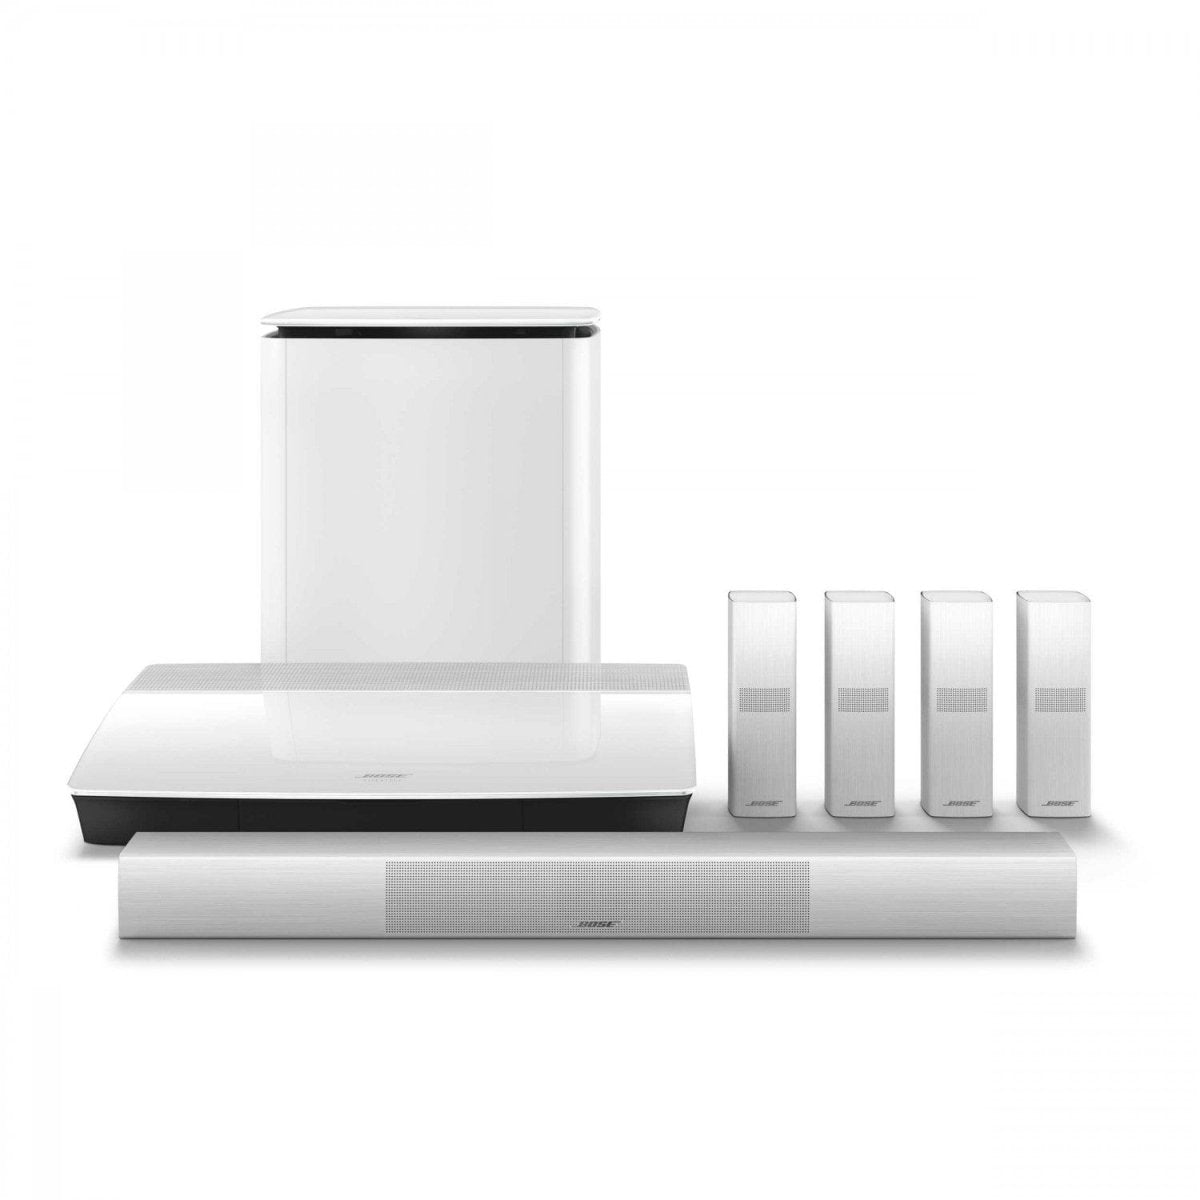 BOSE Lifestyle 650 5.1 Channel Home Theatre Speaker System - White (Manufacture Graded) - Atlantic Electrics